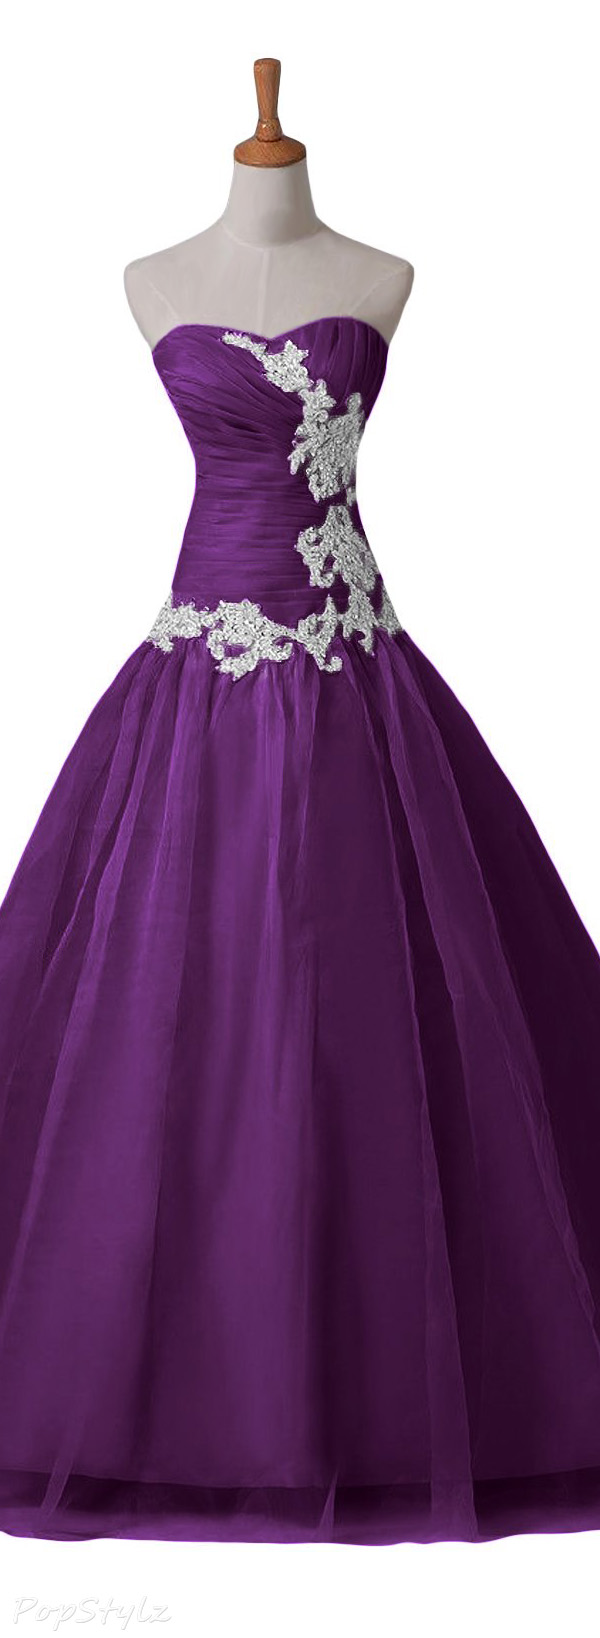 Sunvary Strapless Lon Formal Evening Gown